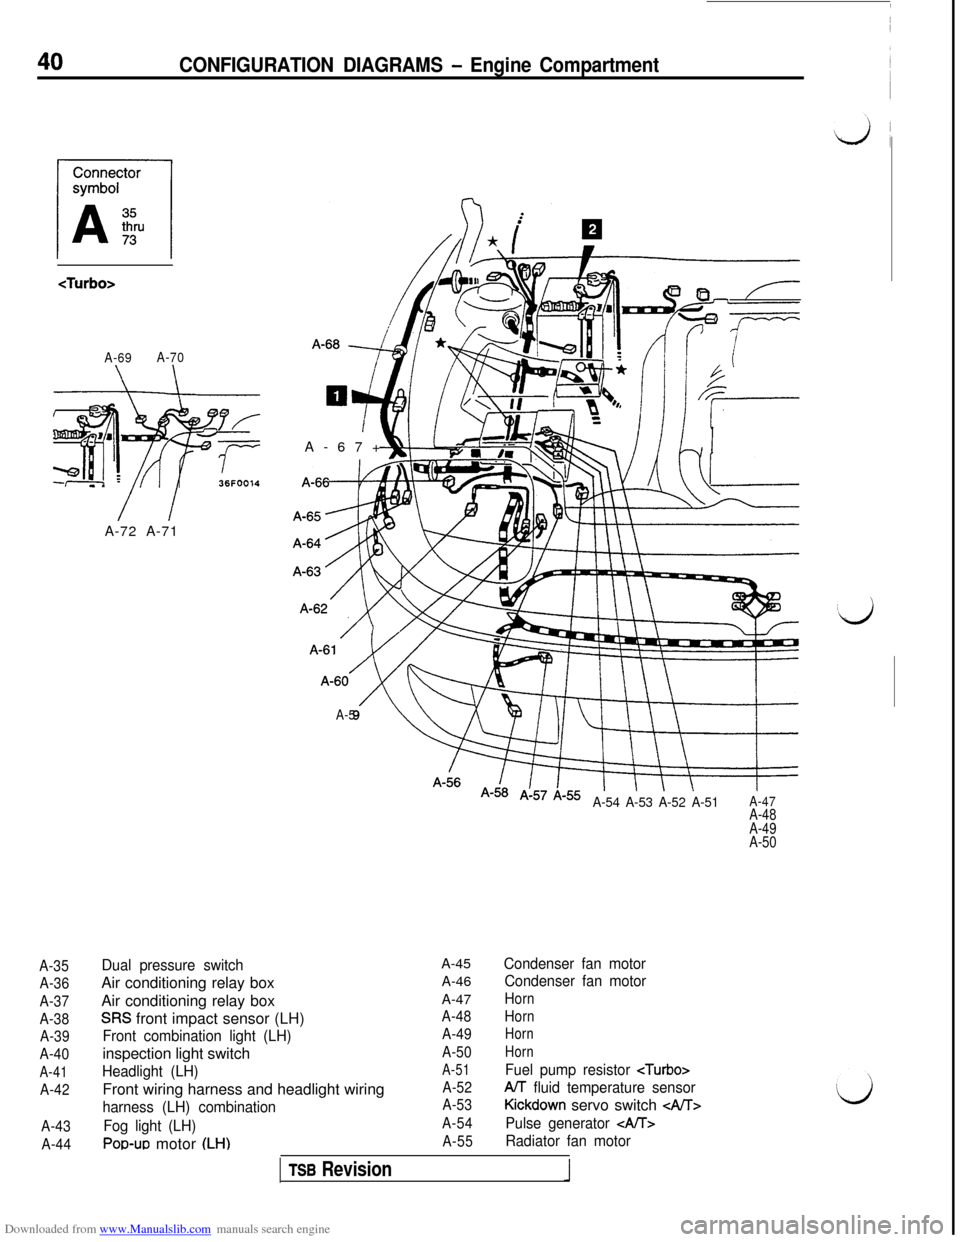 MITSUBISHI 3000GT 1993 2.G Service Manual Downloaded from www.Manualslib.com manuals search engine CONFIGURATION DIAGRAMS - Engine Compartment
<Turbo>
A-69A-70
\ \
36FOO14
A-35
A-36
A-37
A-38
A-39
A-40
A-41
A-42
A-43
A-44A-72 A-71A-67+
A-5
A-